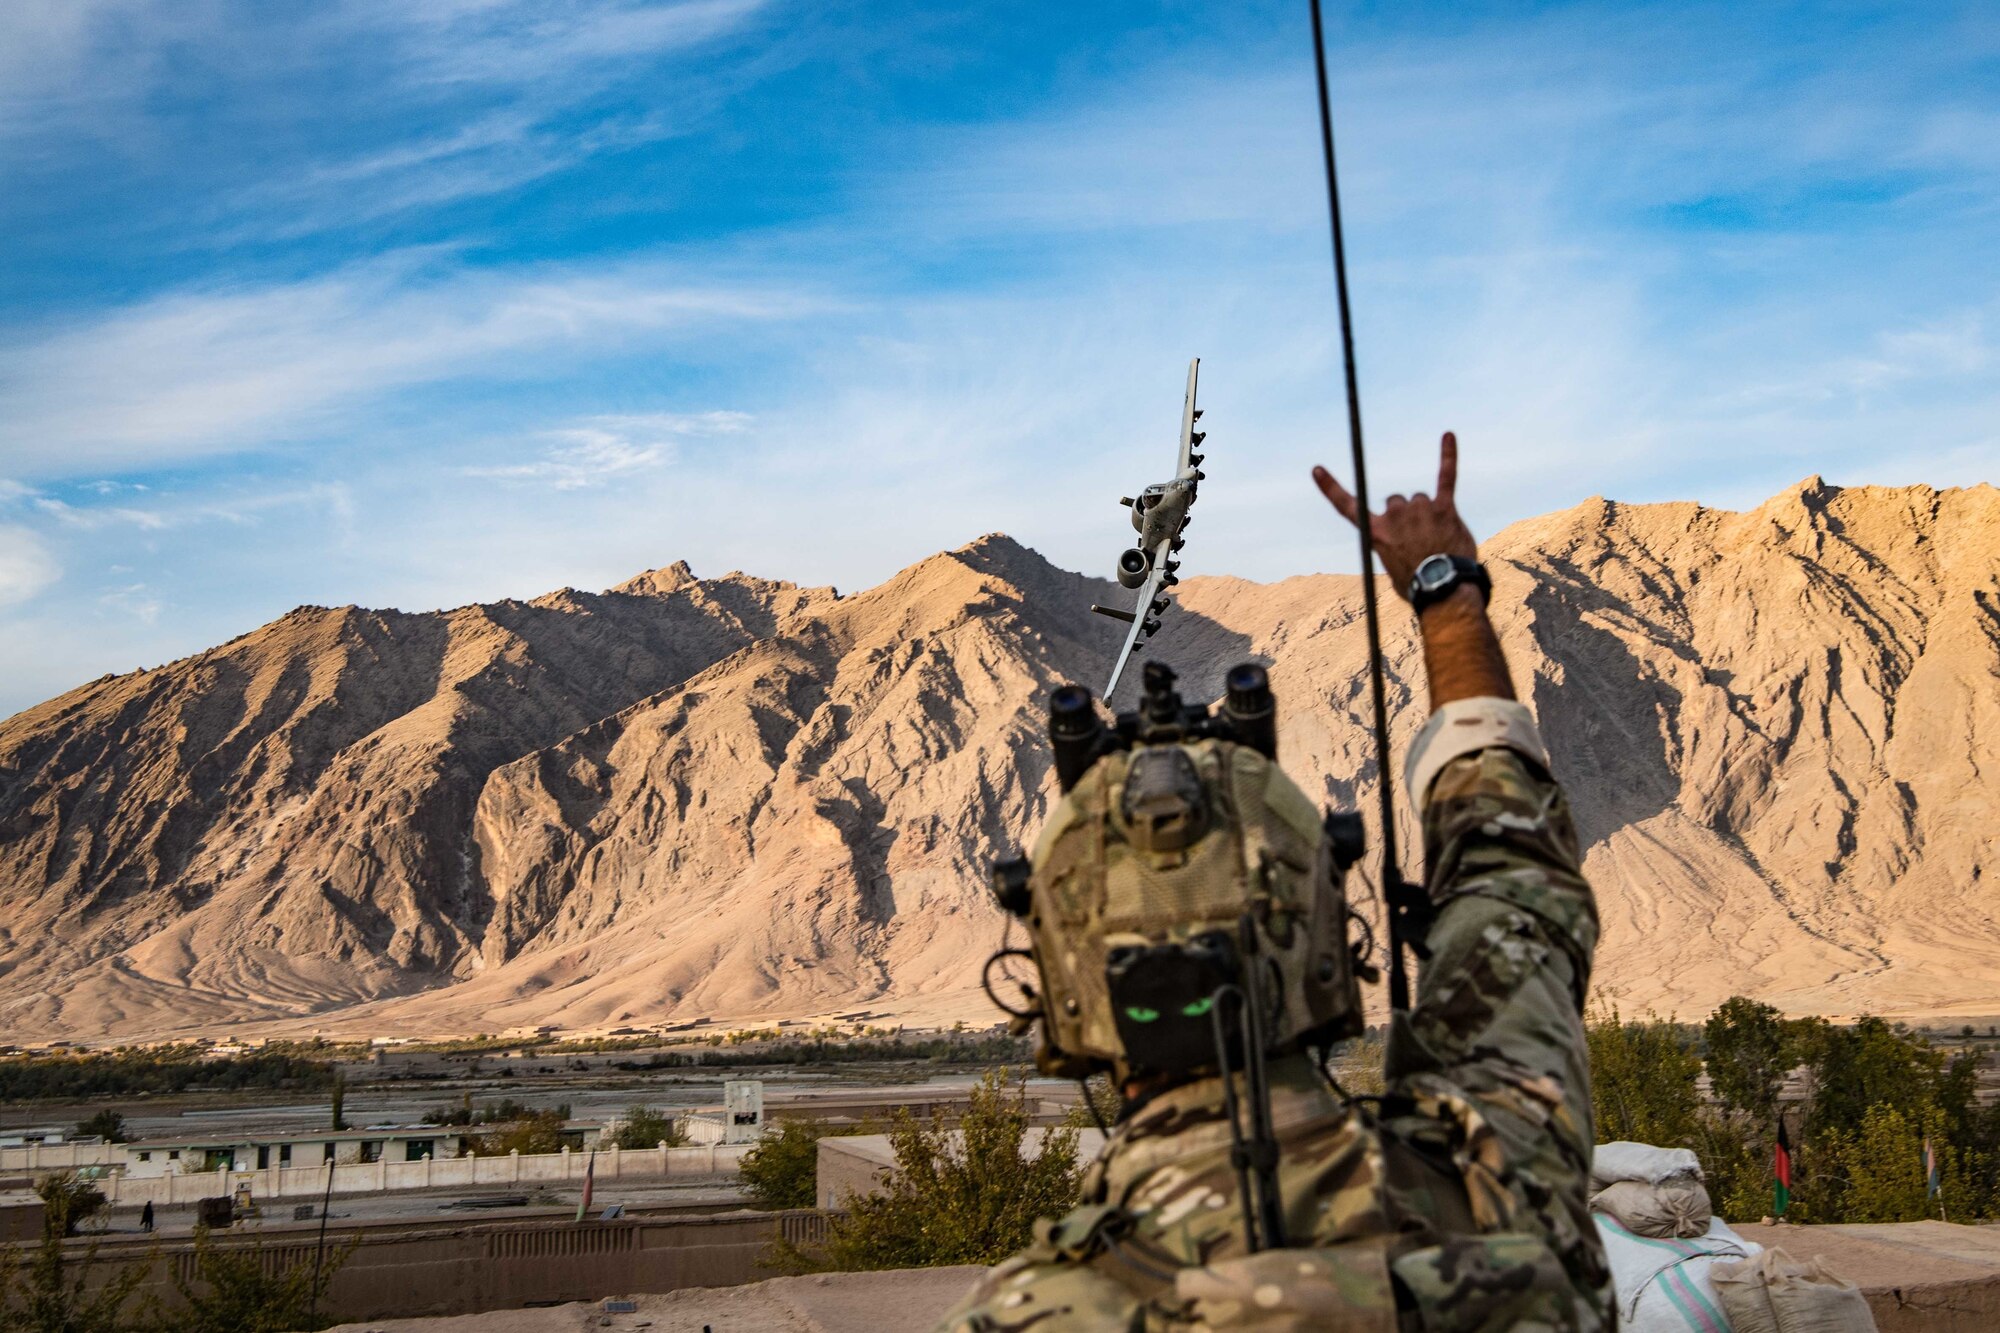 A U.S. Air Force special tactics officer controls aircraft during Operation Resolute Support at an undisclosed location in Afghanistan, Nov. 18, 2019.